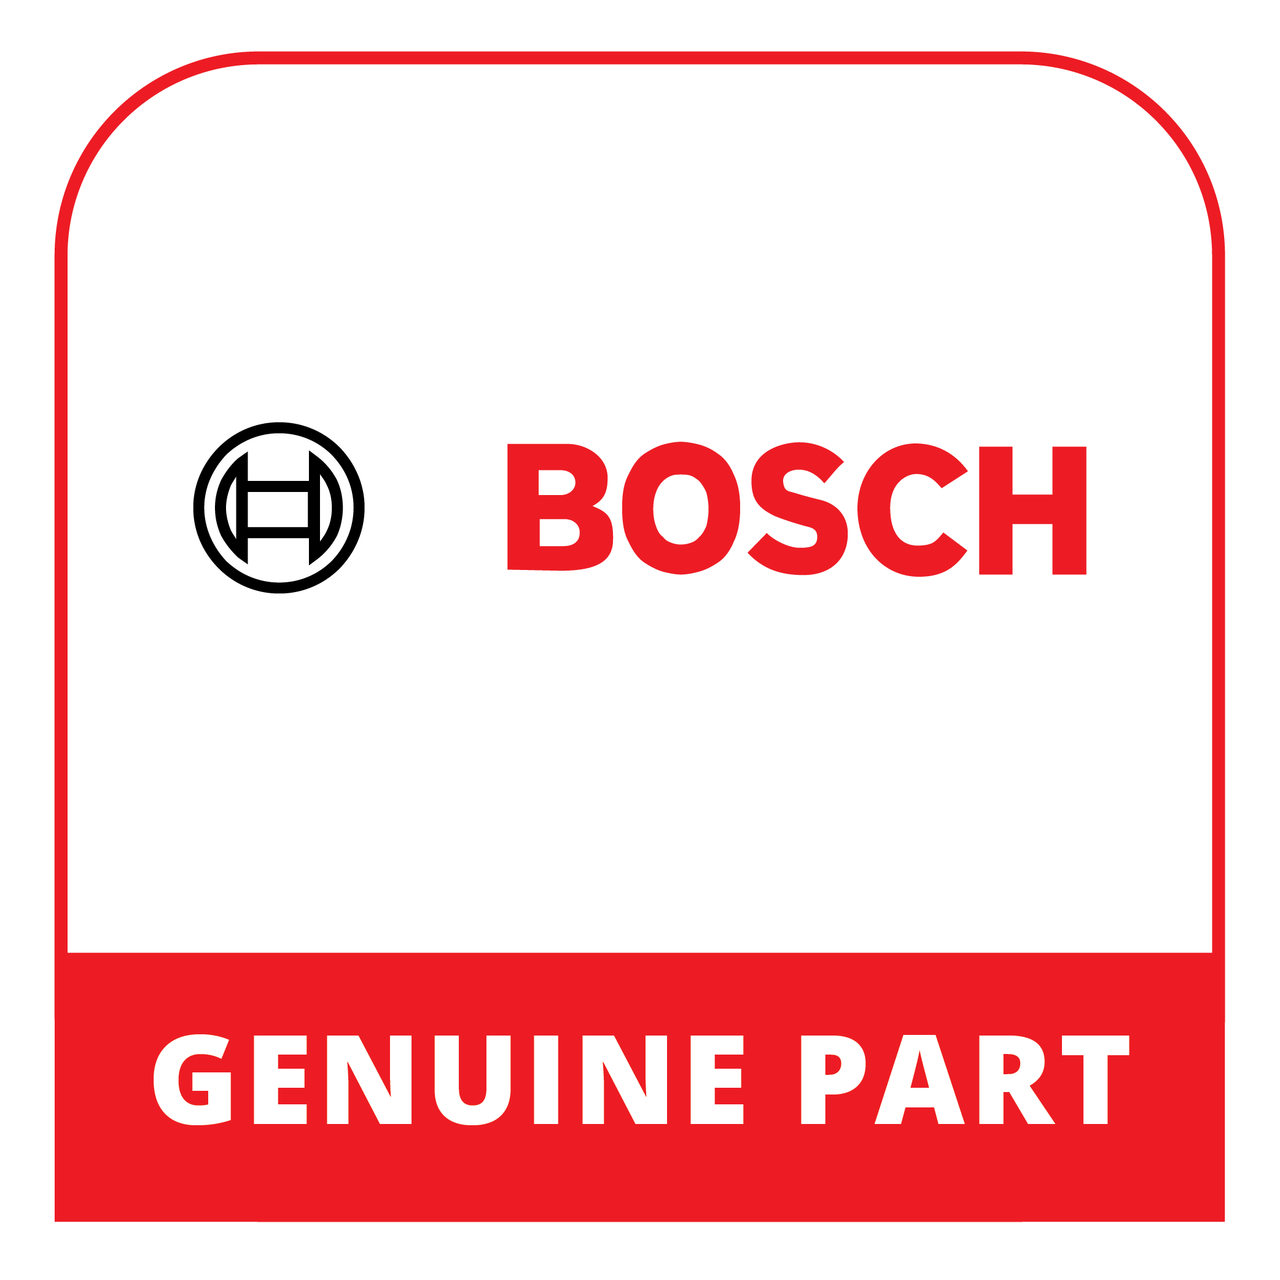 Bosch 00219148 - Covering - Genuine Bosch (Thermador) Part